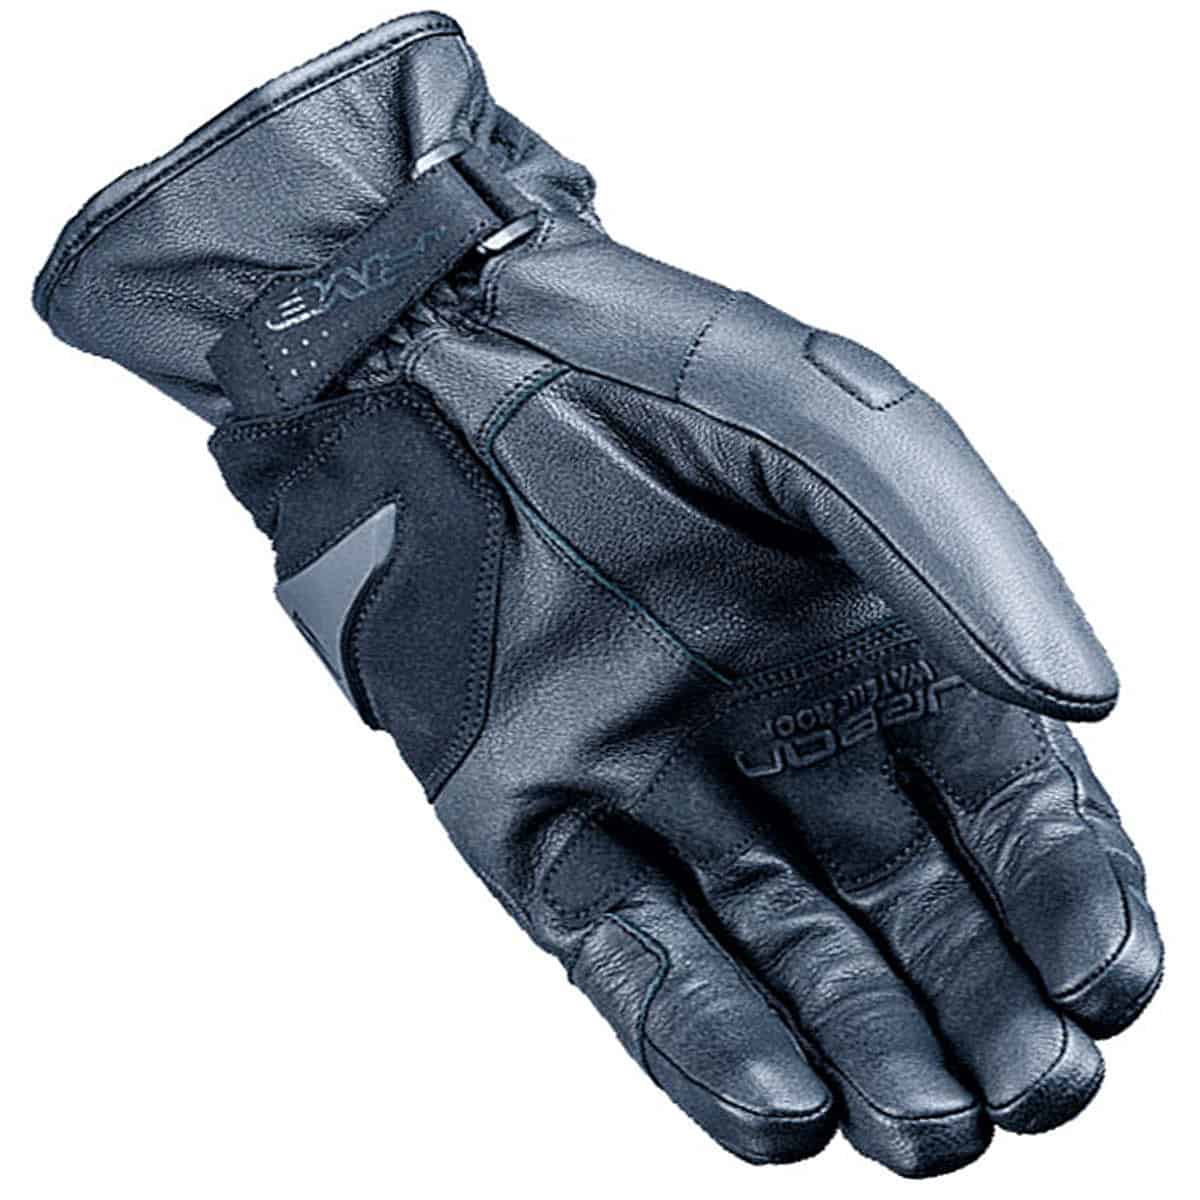 Five Urban waterproof leather gloves: Short-cuffed breezy gloves with excellent grip - palm